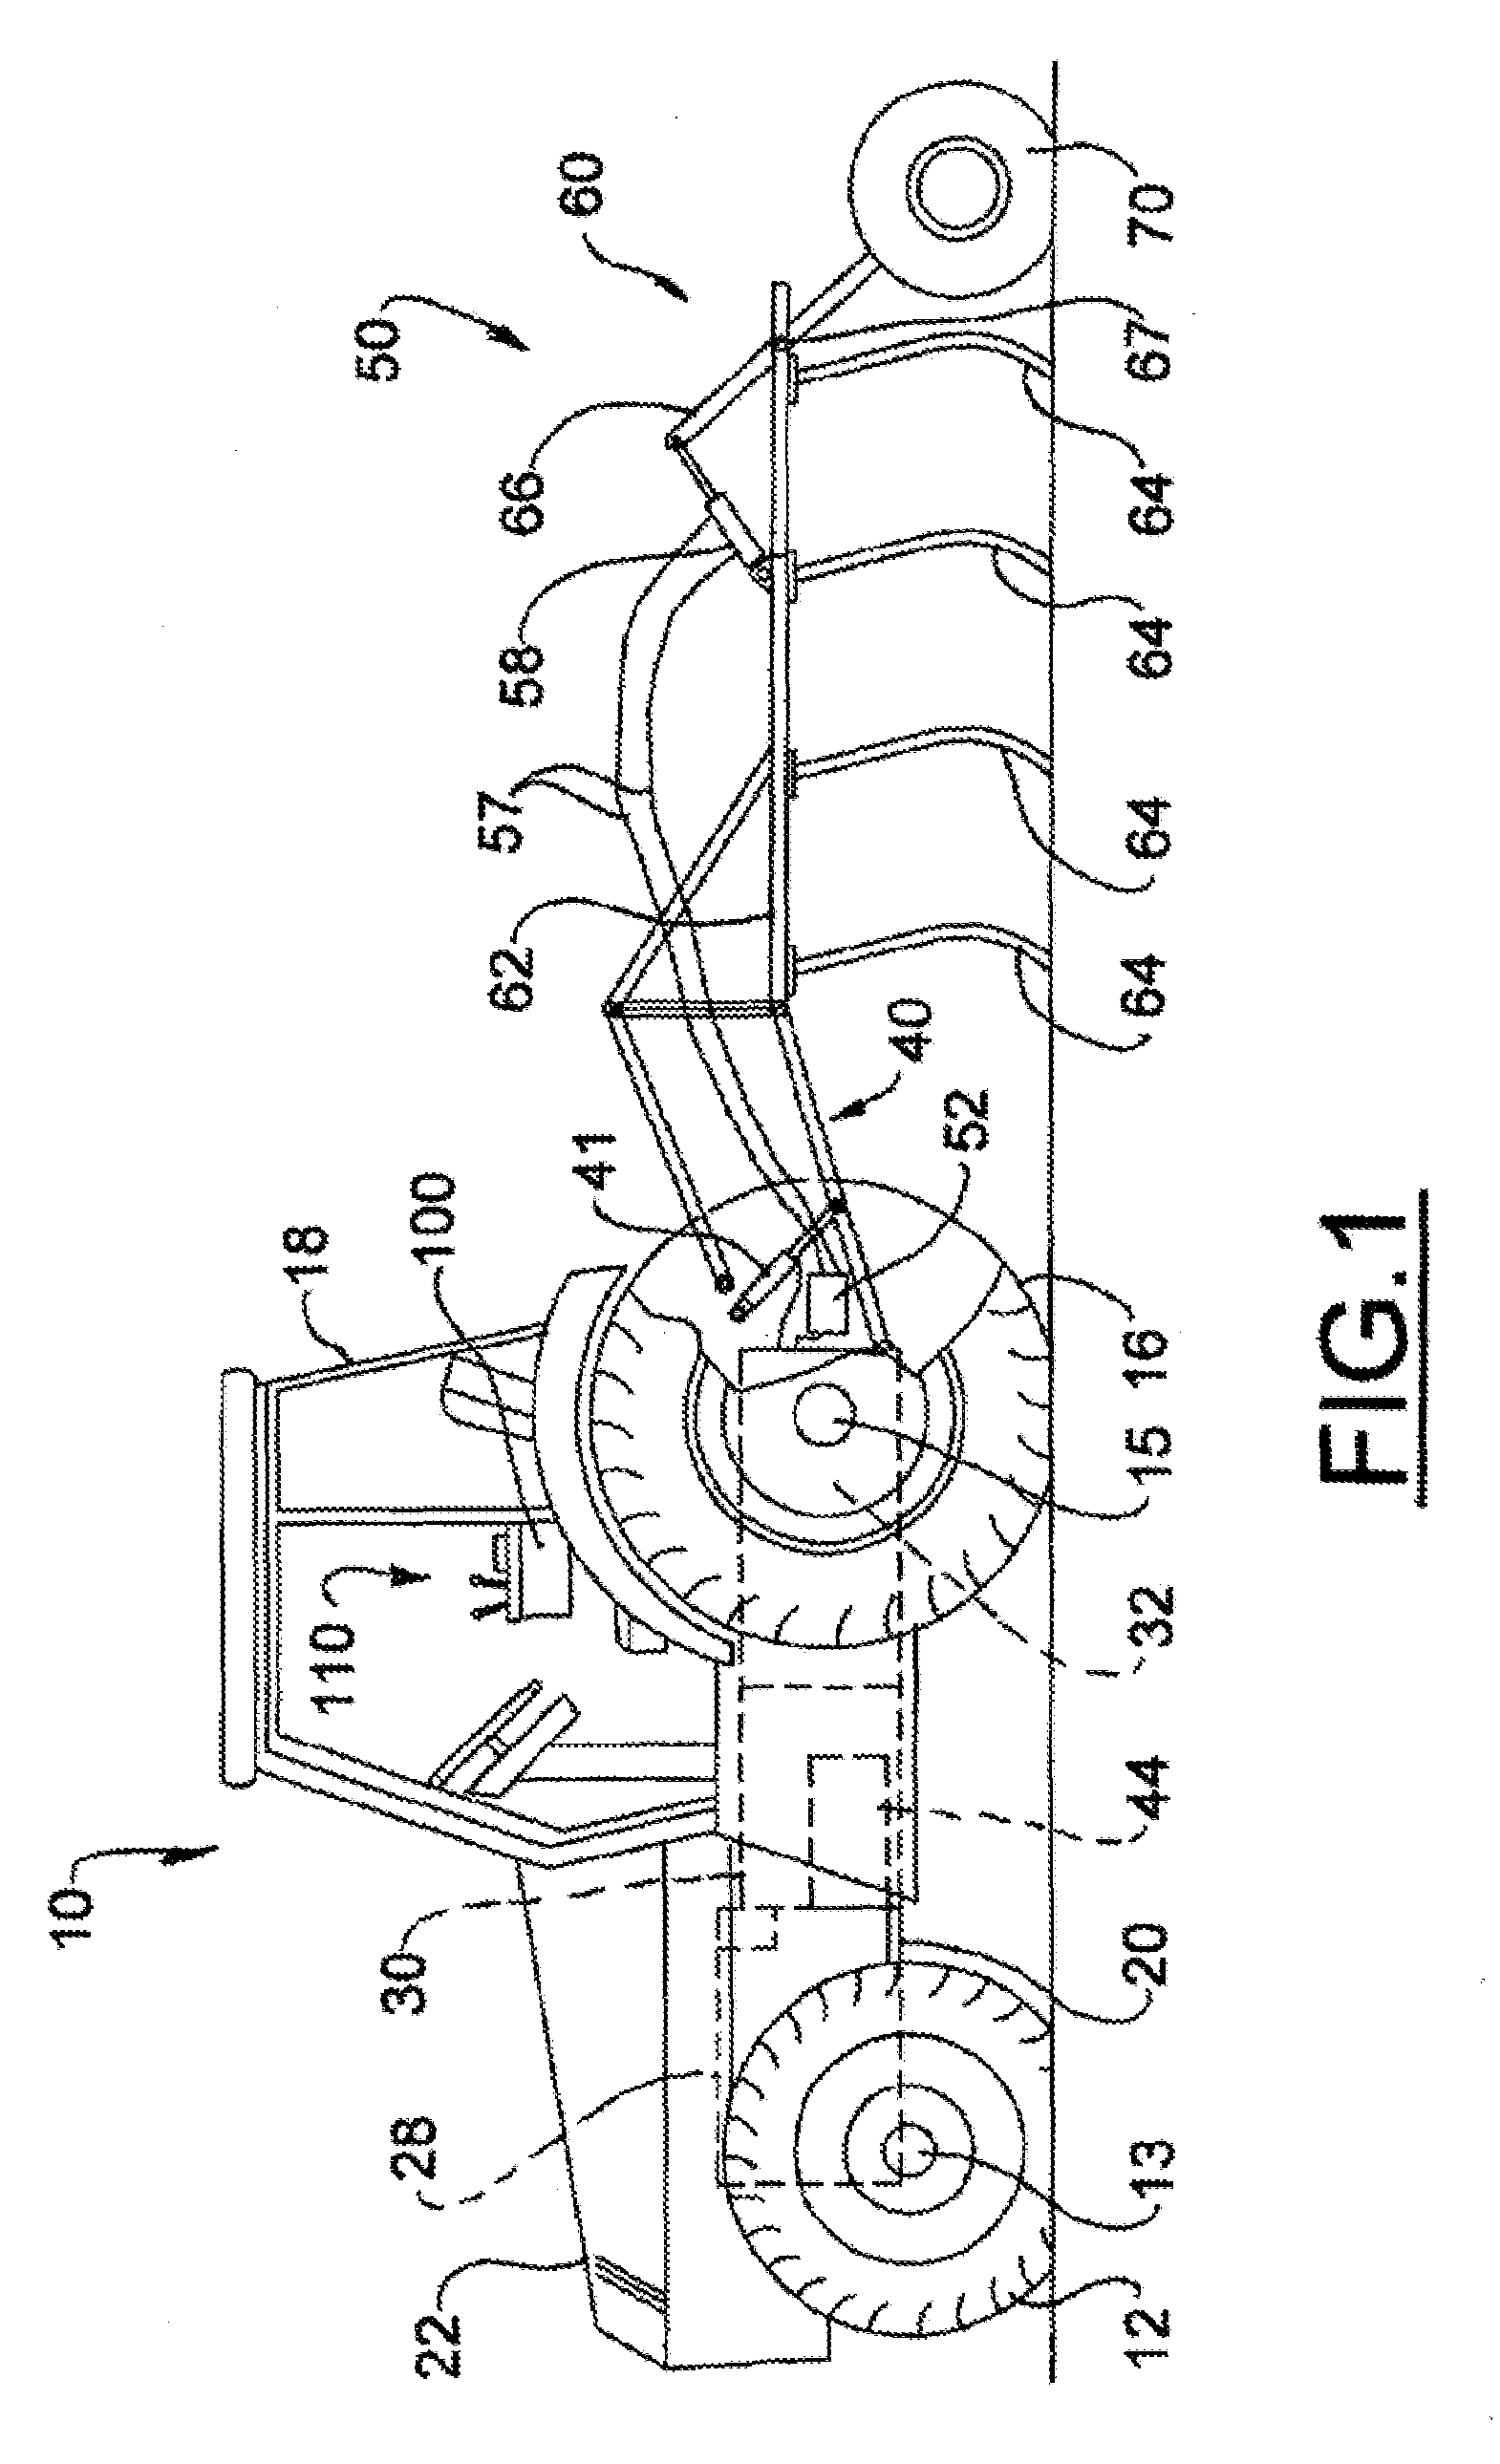 Electronic draft control for semi-trailed implements